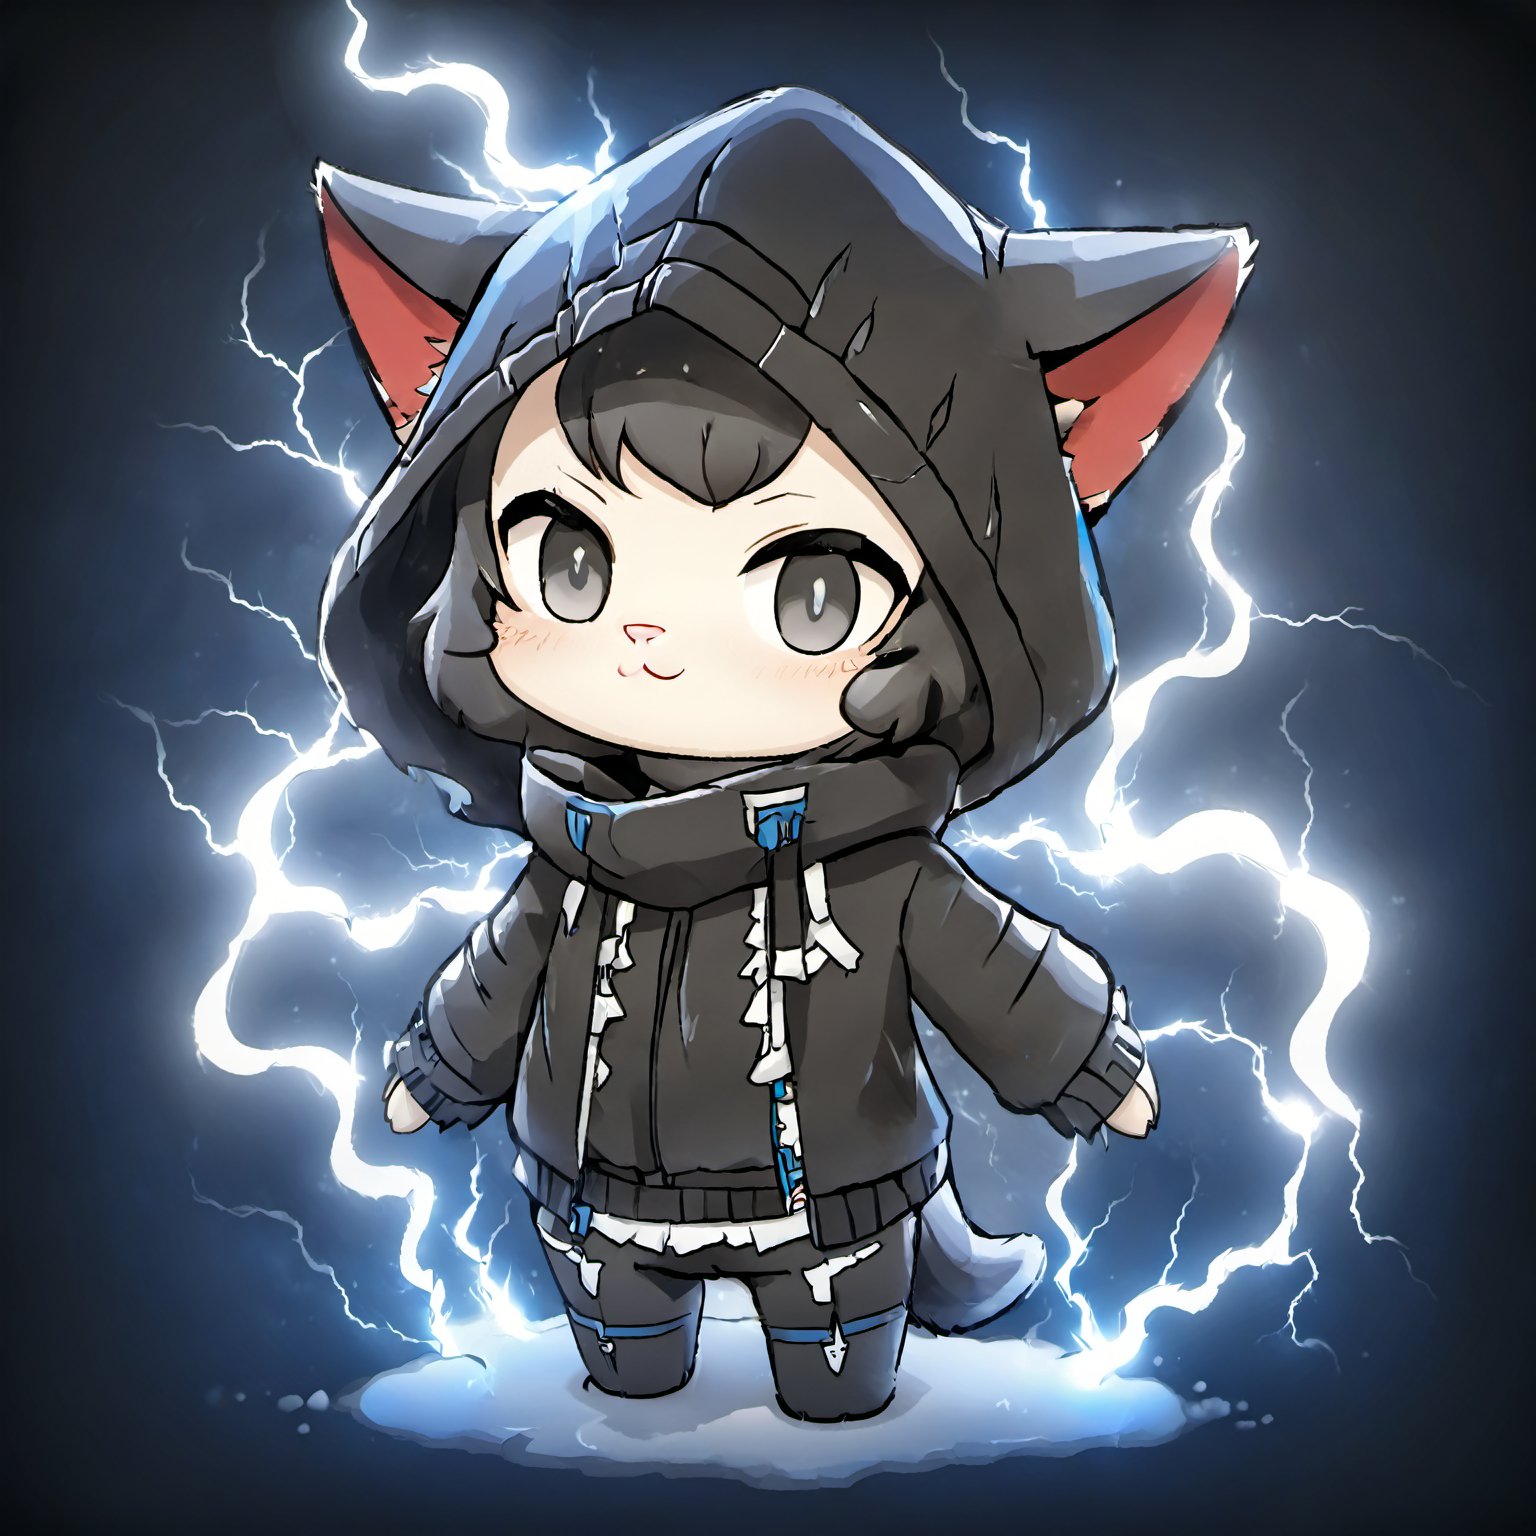 assassin creed, a cat, winter_clothes, black clothe, hoodie on head, high_resolution, high detail, perfect body,Monster,Xxmix_Catecat,composed of elements of thunder,thunder,electricity,chibi